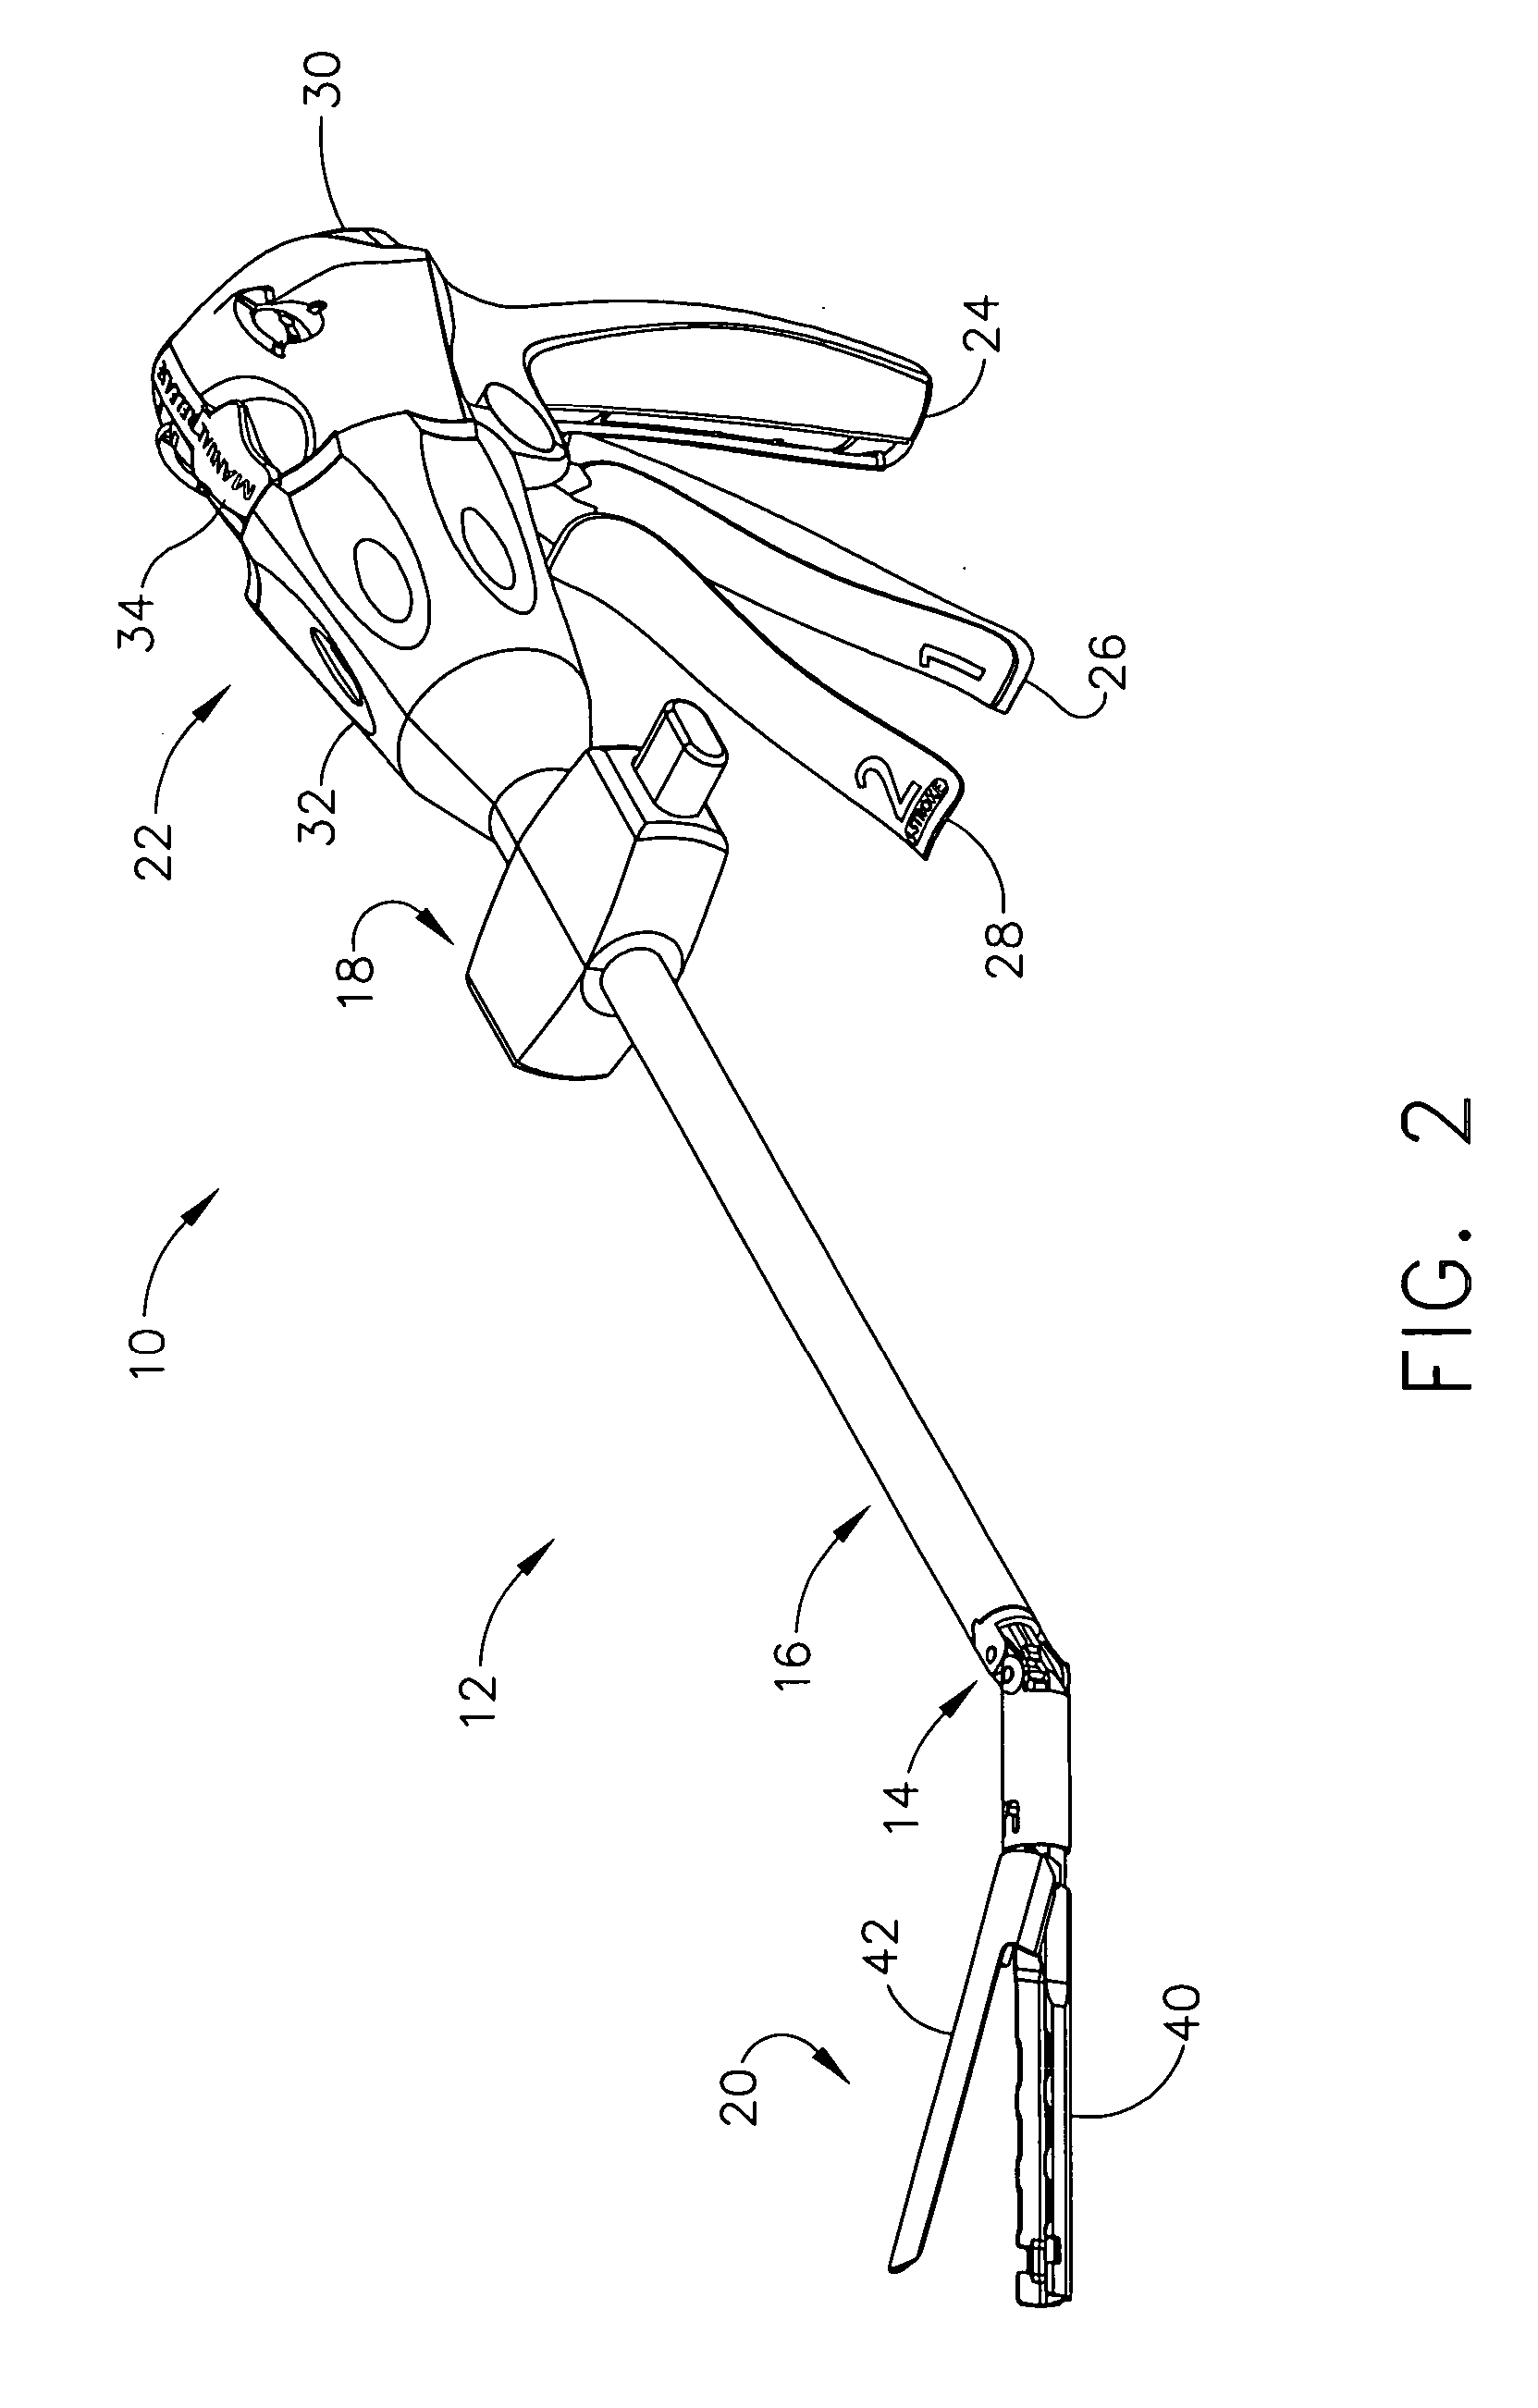 Surgical instrument incorporating a fluid transfer controlled articulation mechanism